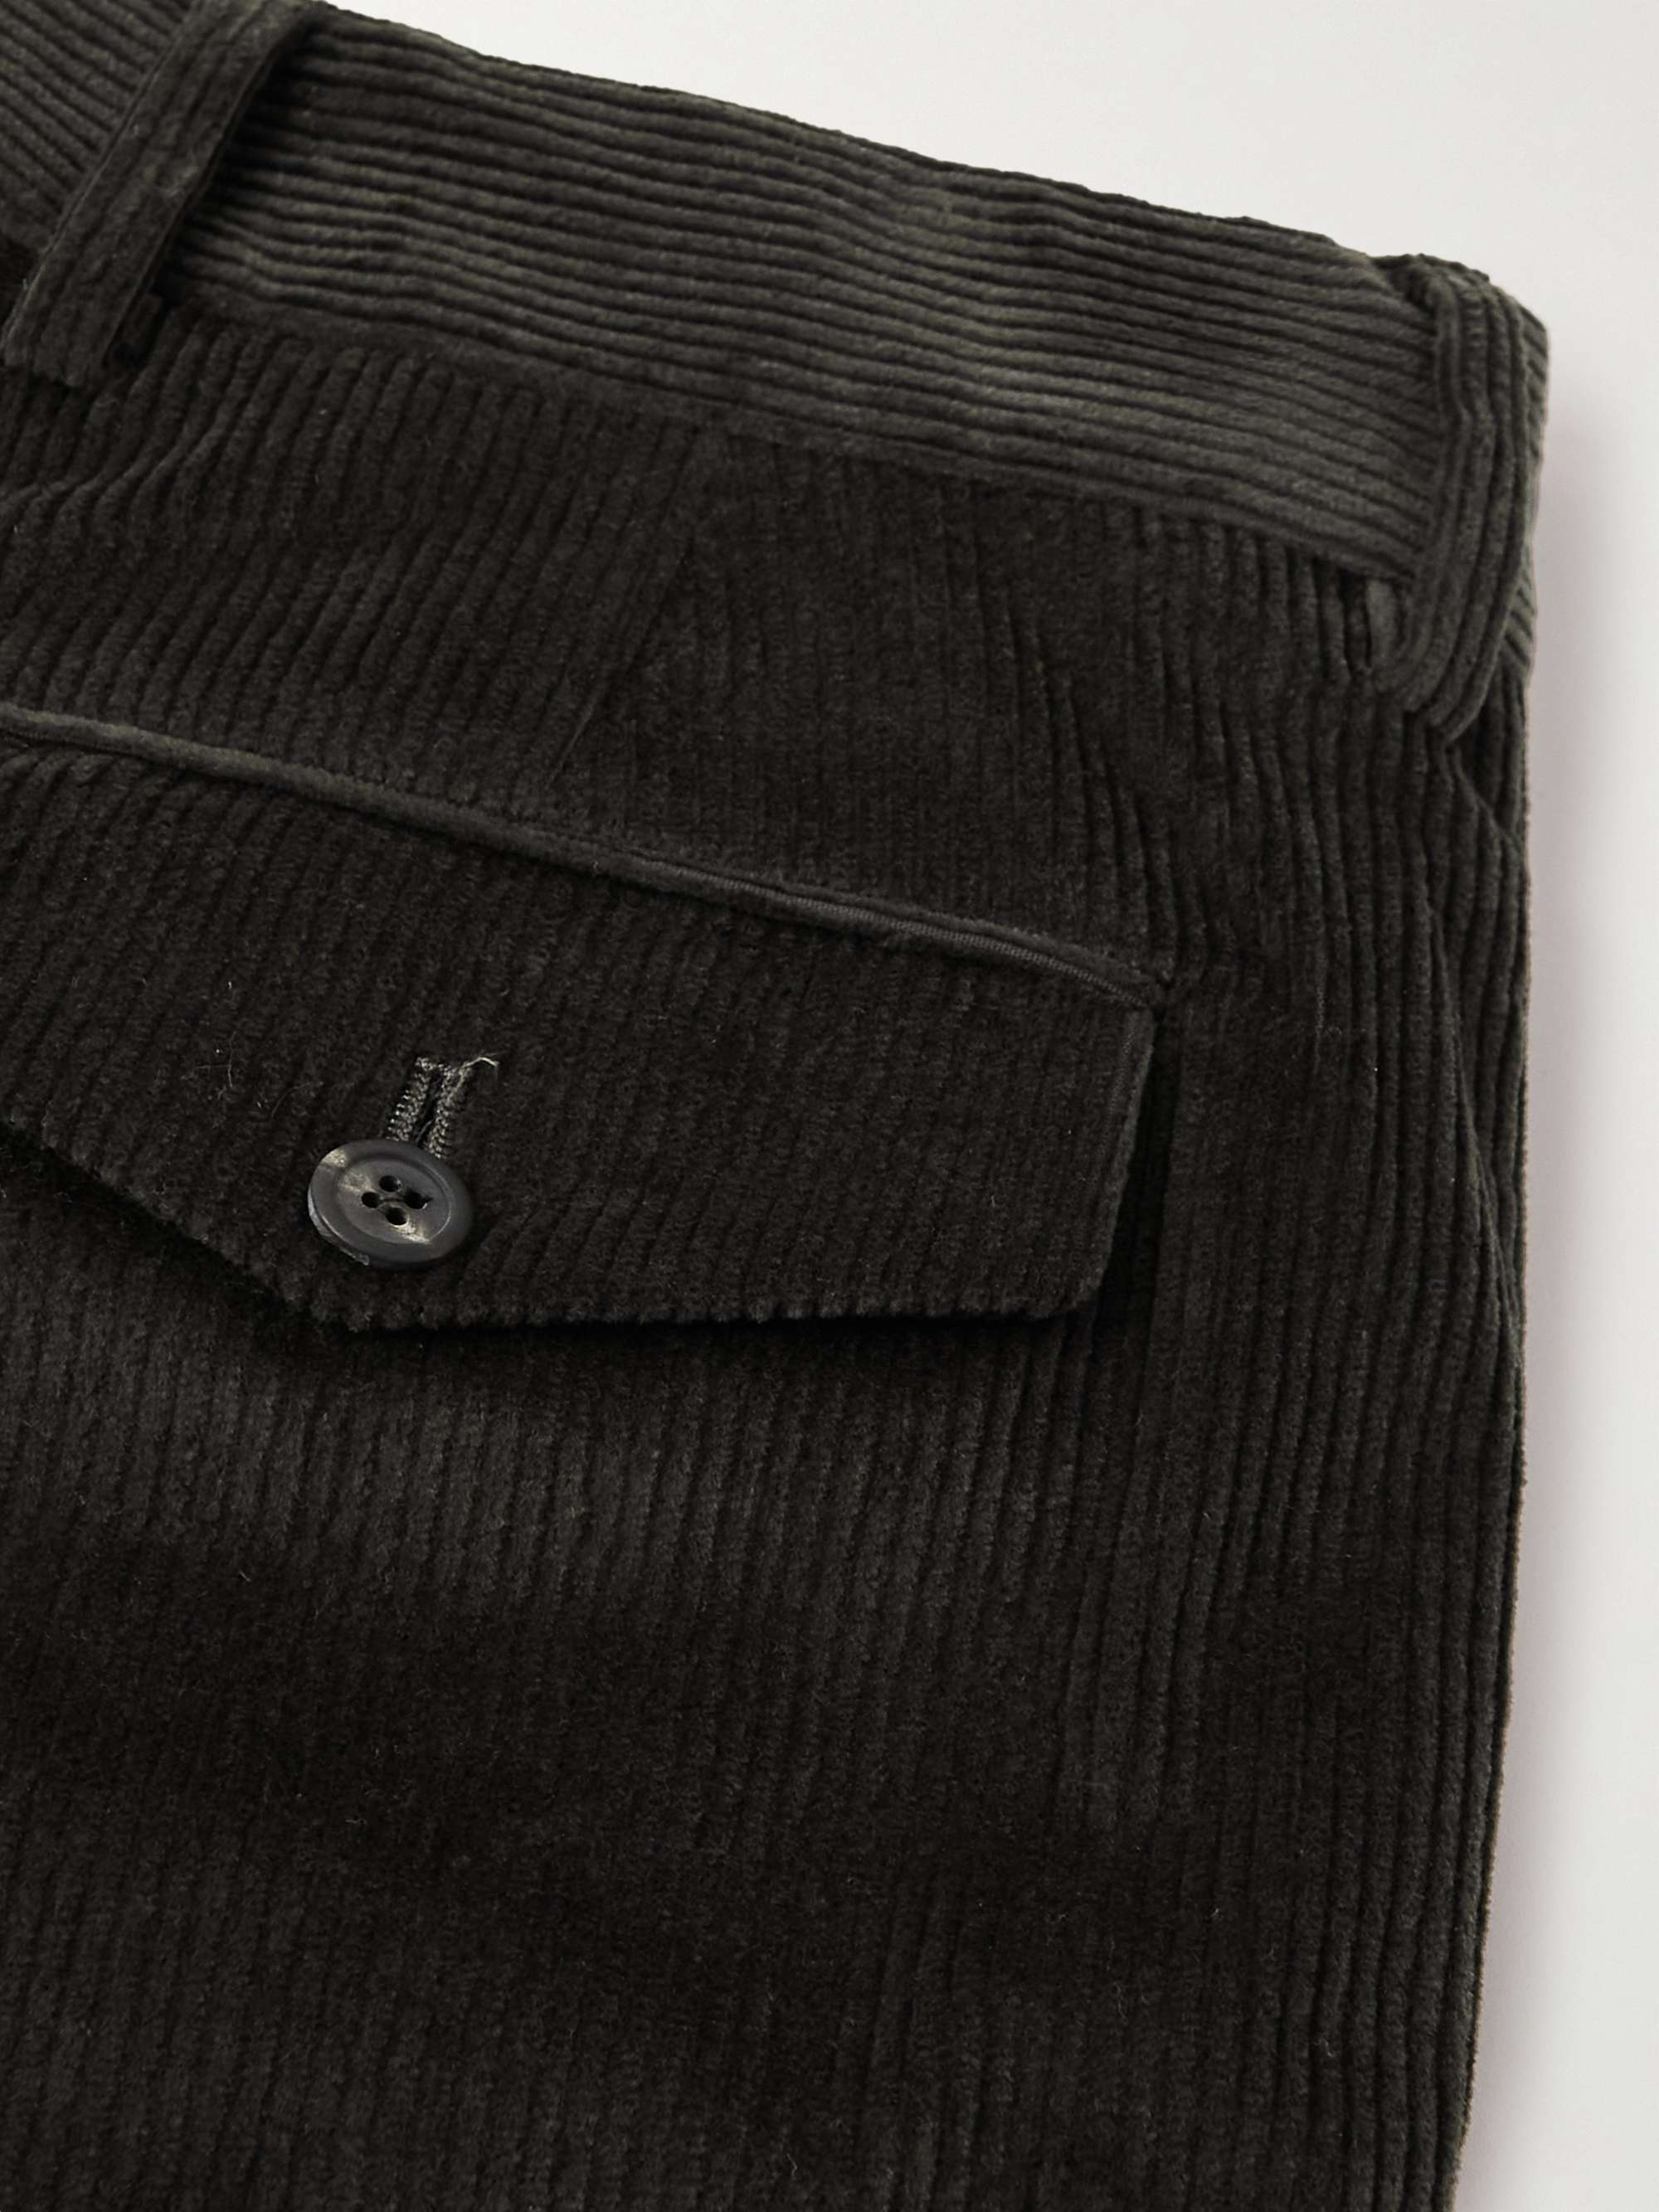 PAUL SMITH Tapered Cotton-Blend Corduroy Trousers